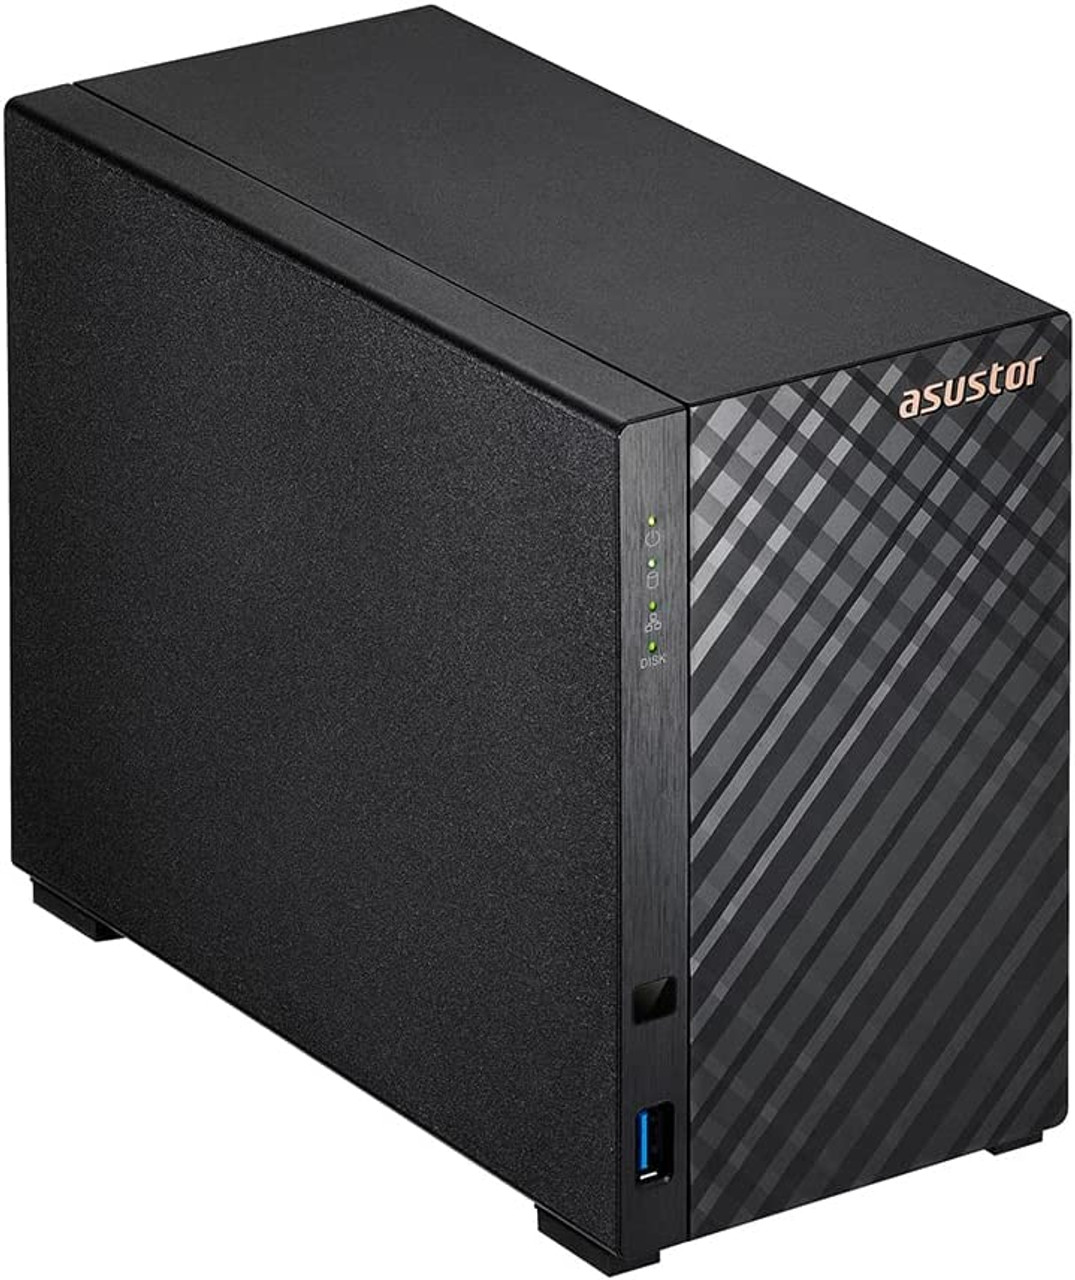 Asustor AS1102T DRIVESTOR 2, Personal 2-Bays NAS, Quad-Core CPU, 2.5GbE Port, 1GB DDR4 RAM, Network Attached Storage (Diskless)